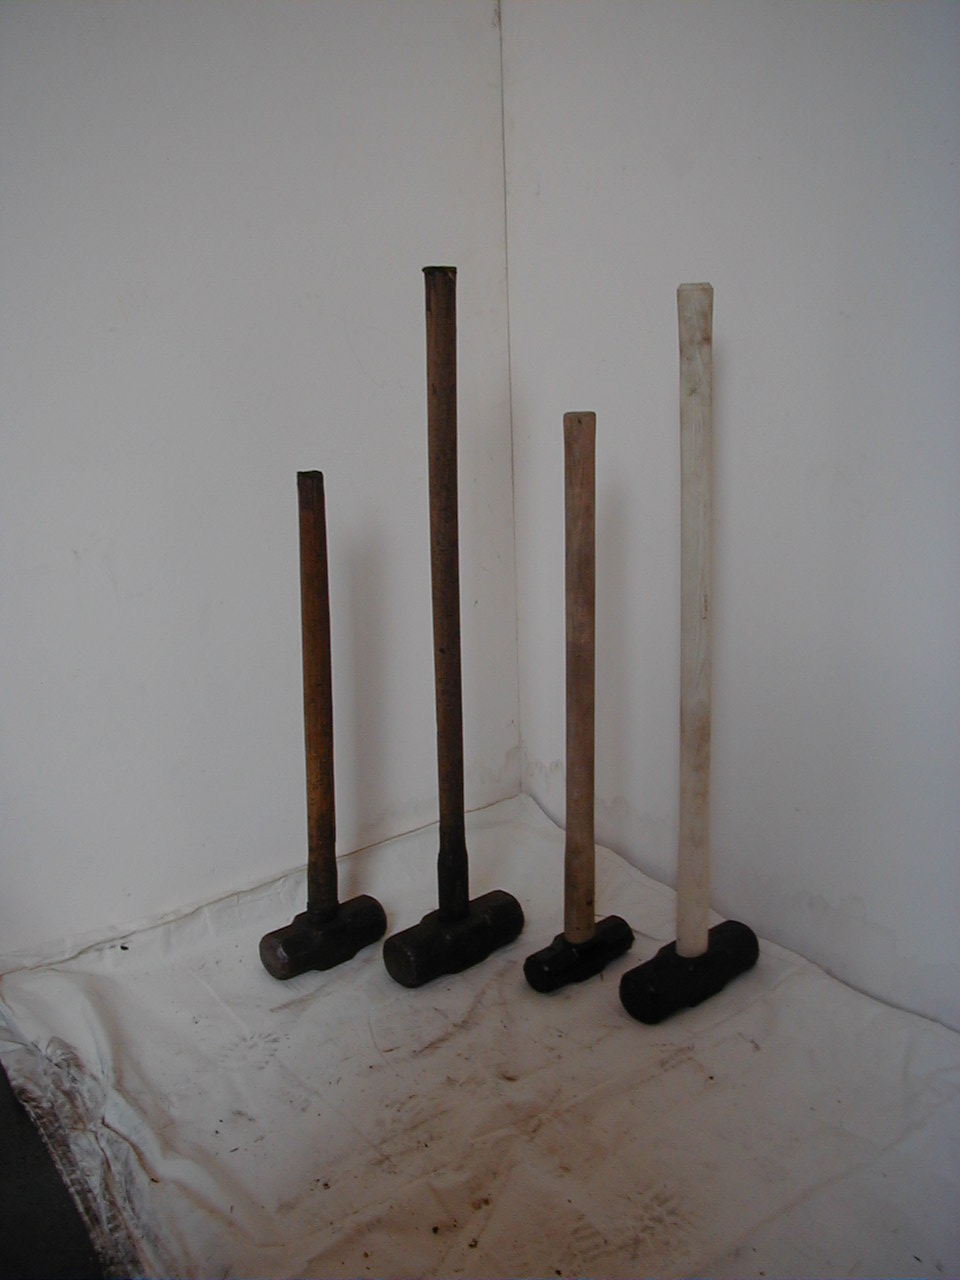 Hammers - Sledge hammers